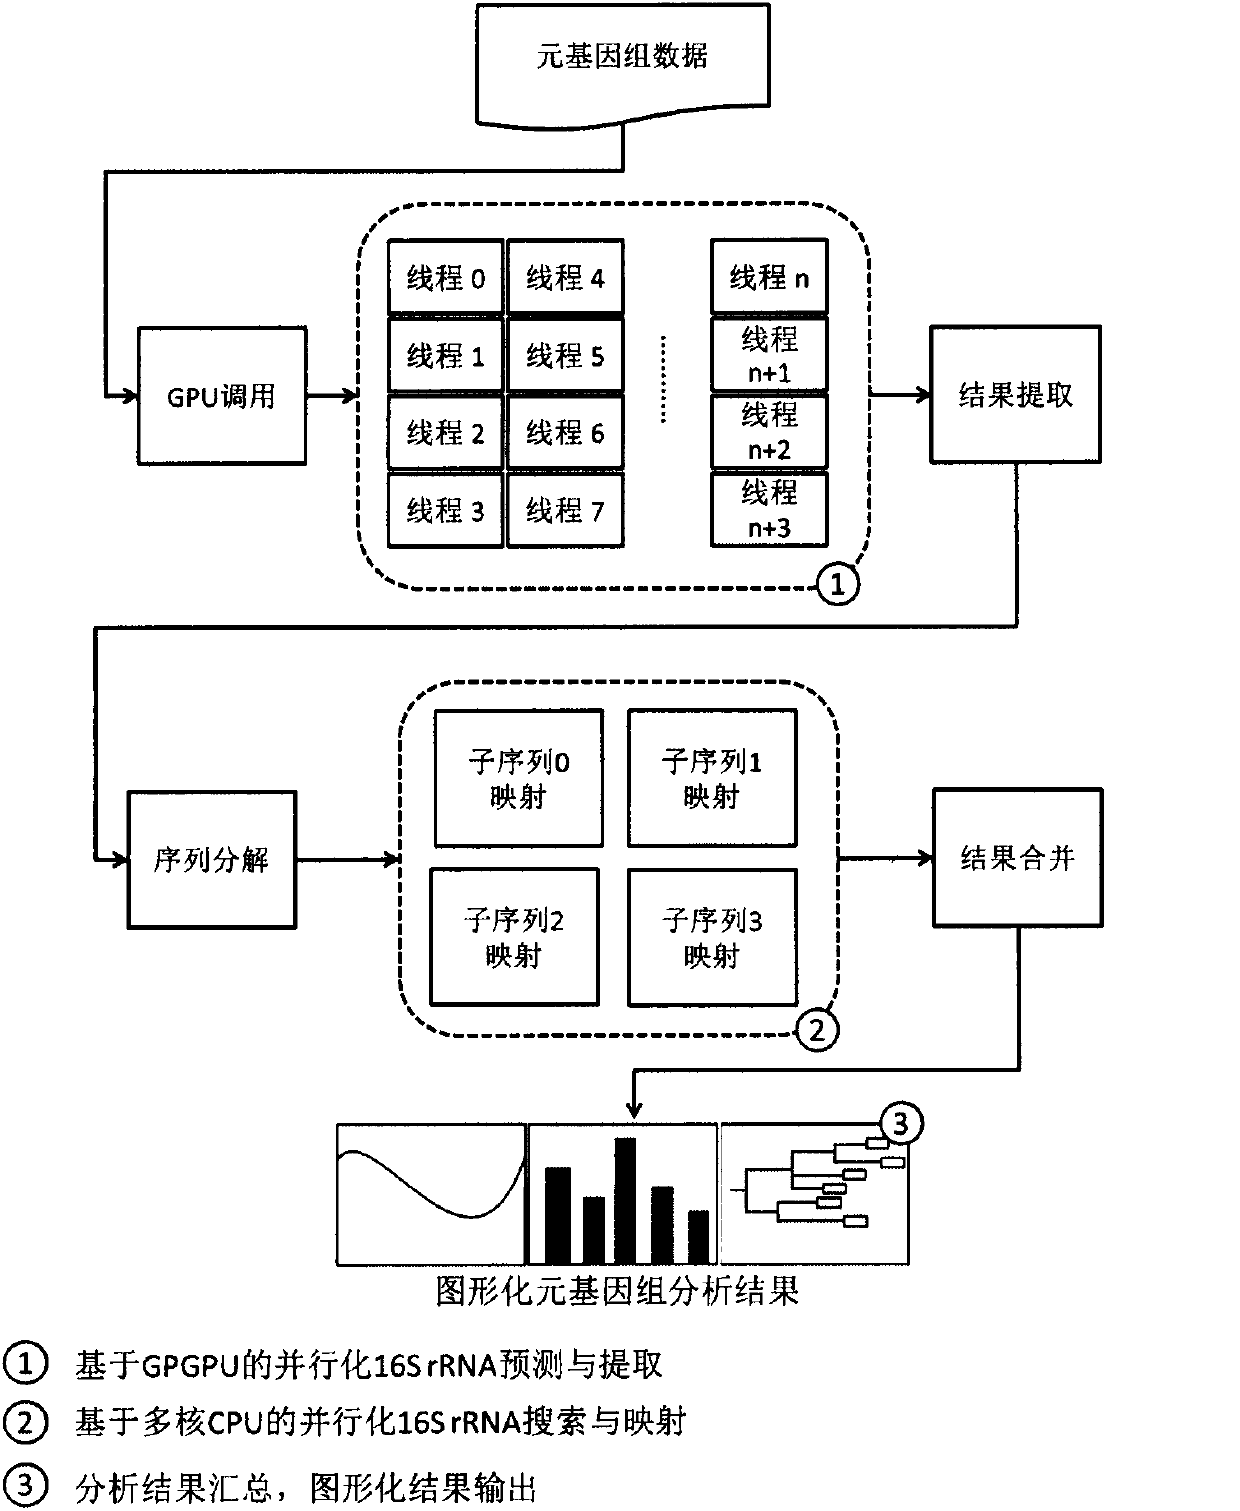 High-performance metagenomic data analysis system on basis of GPGPU (General Purpose Graphics Processing Units) and multi-core CPU (Central Processing Unit) hardware